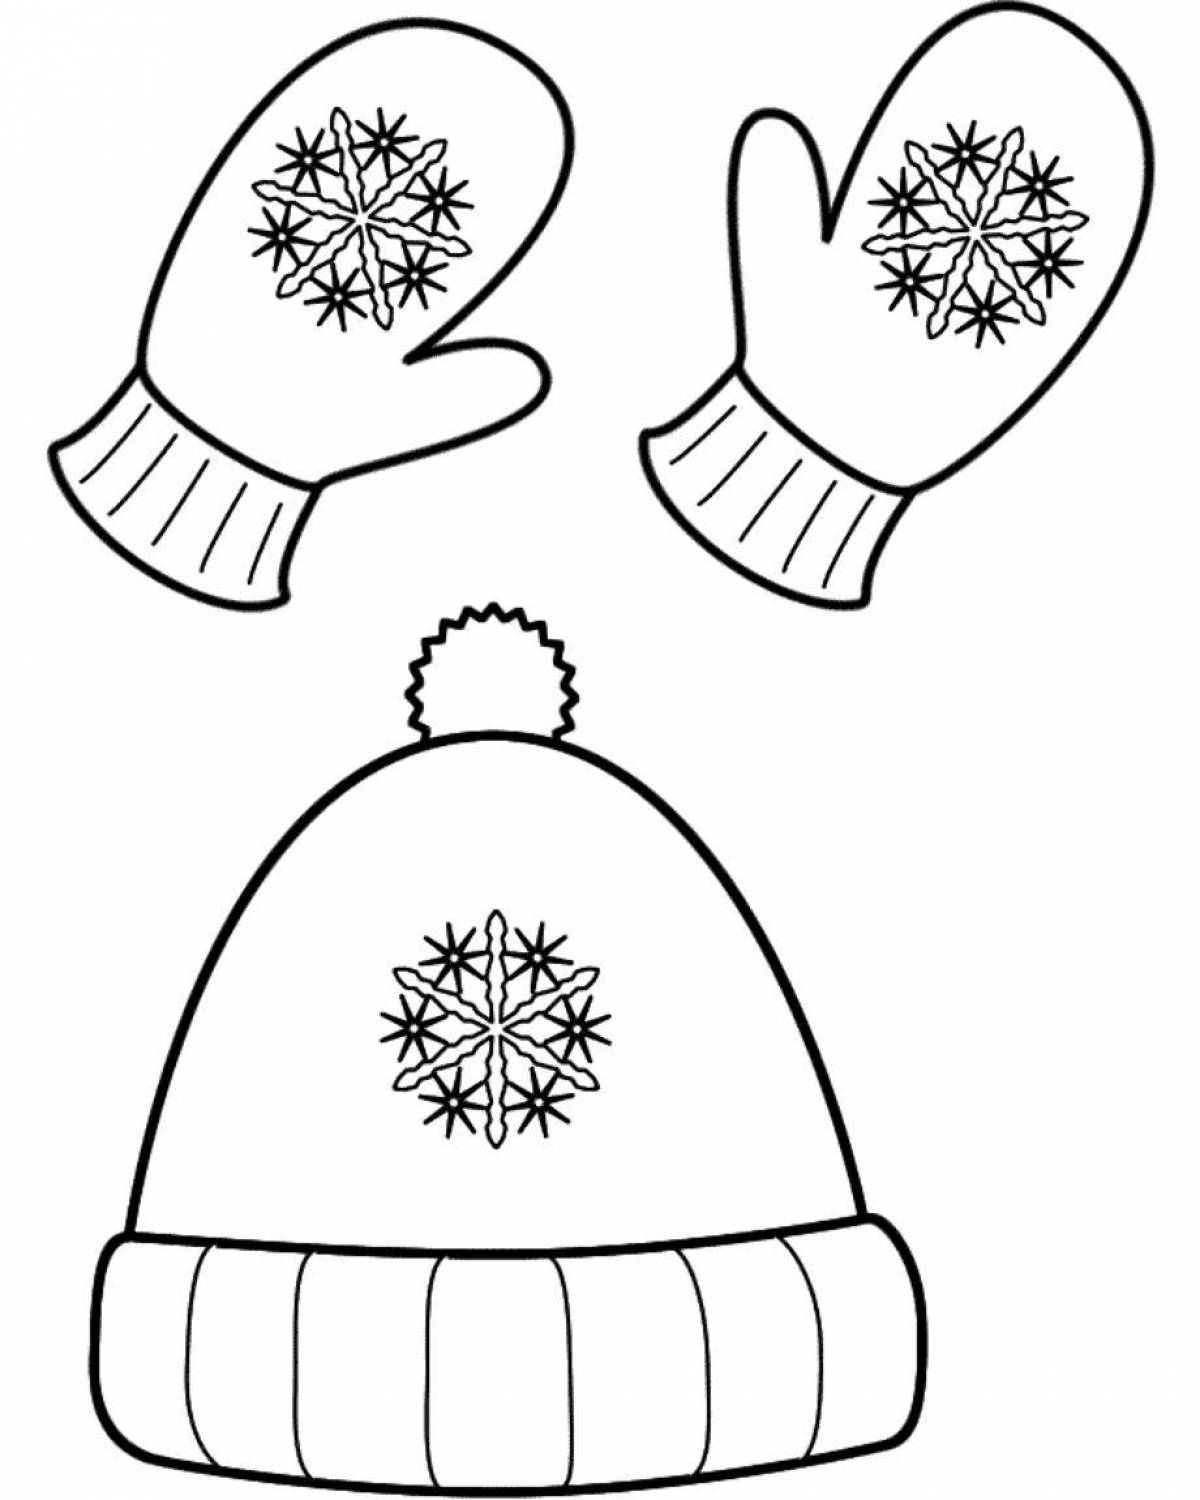 Colouring bright mittens for children 5-6 years old